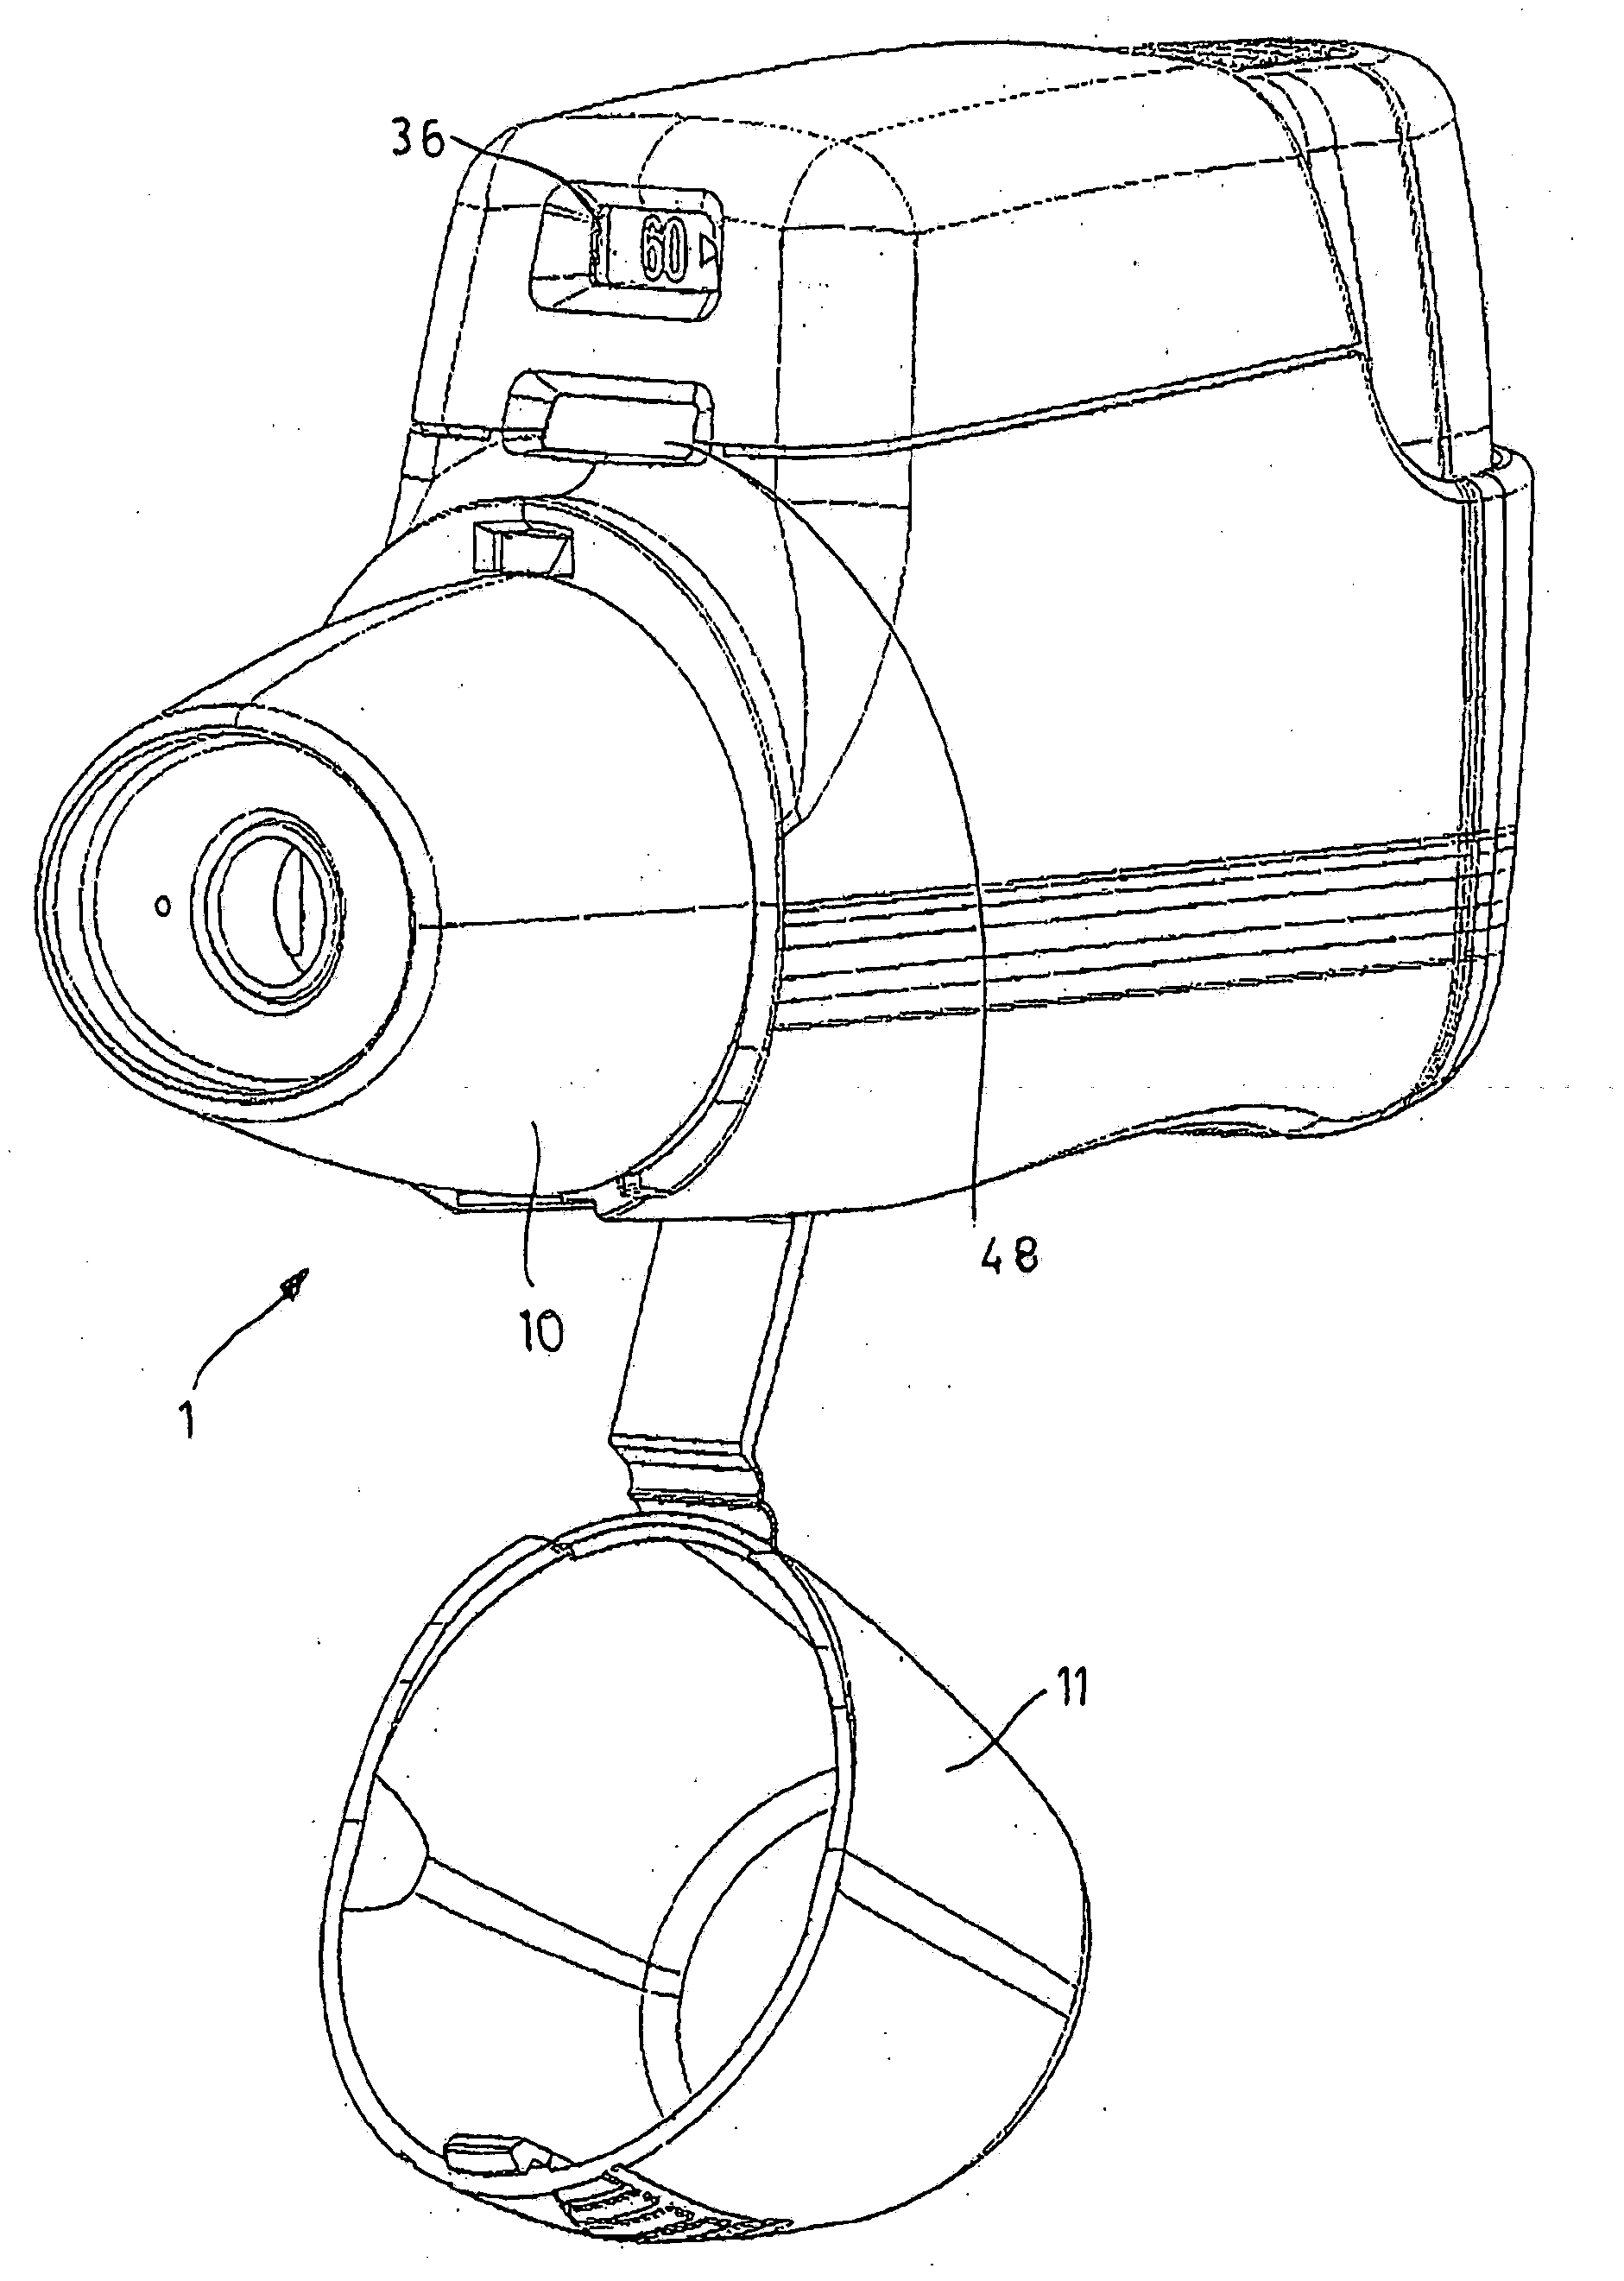 Inhalation device for powdered drugs